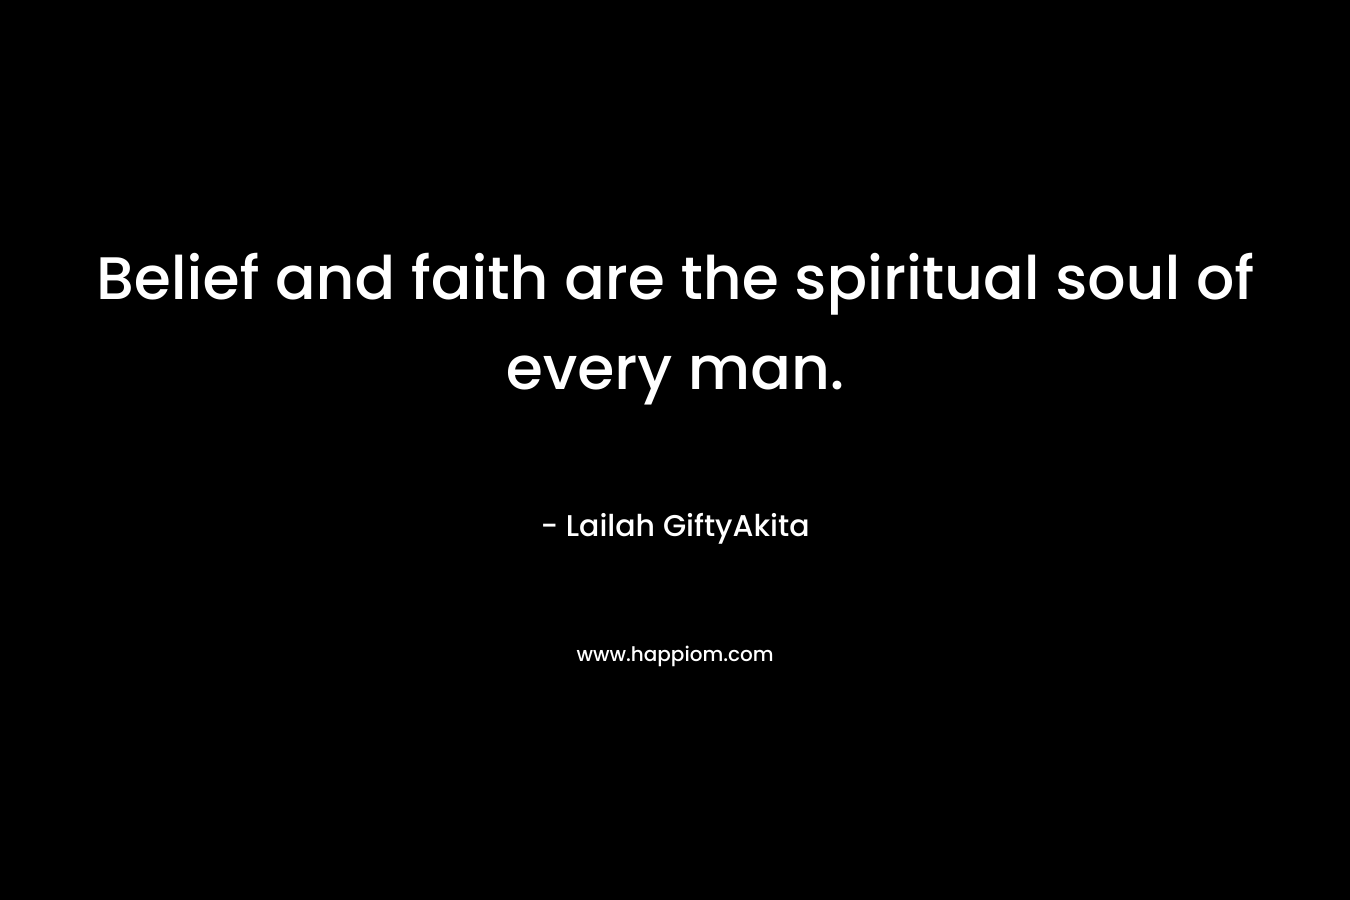 Belief and faith are the spiritual soul of every man.